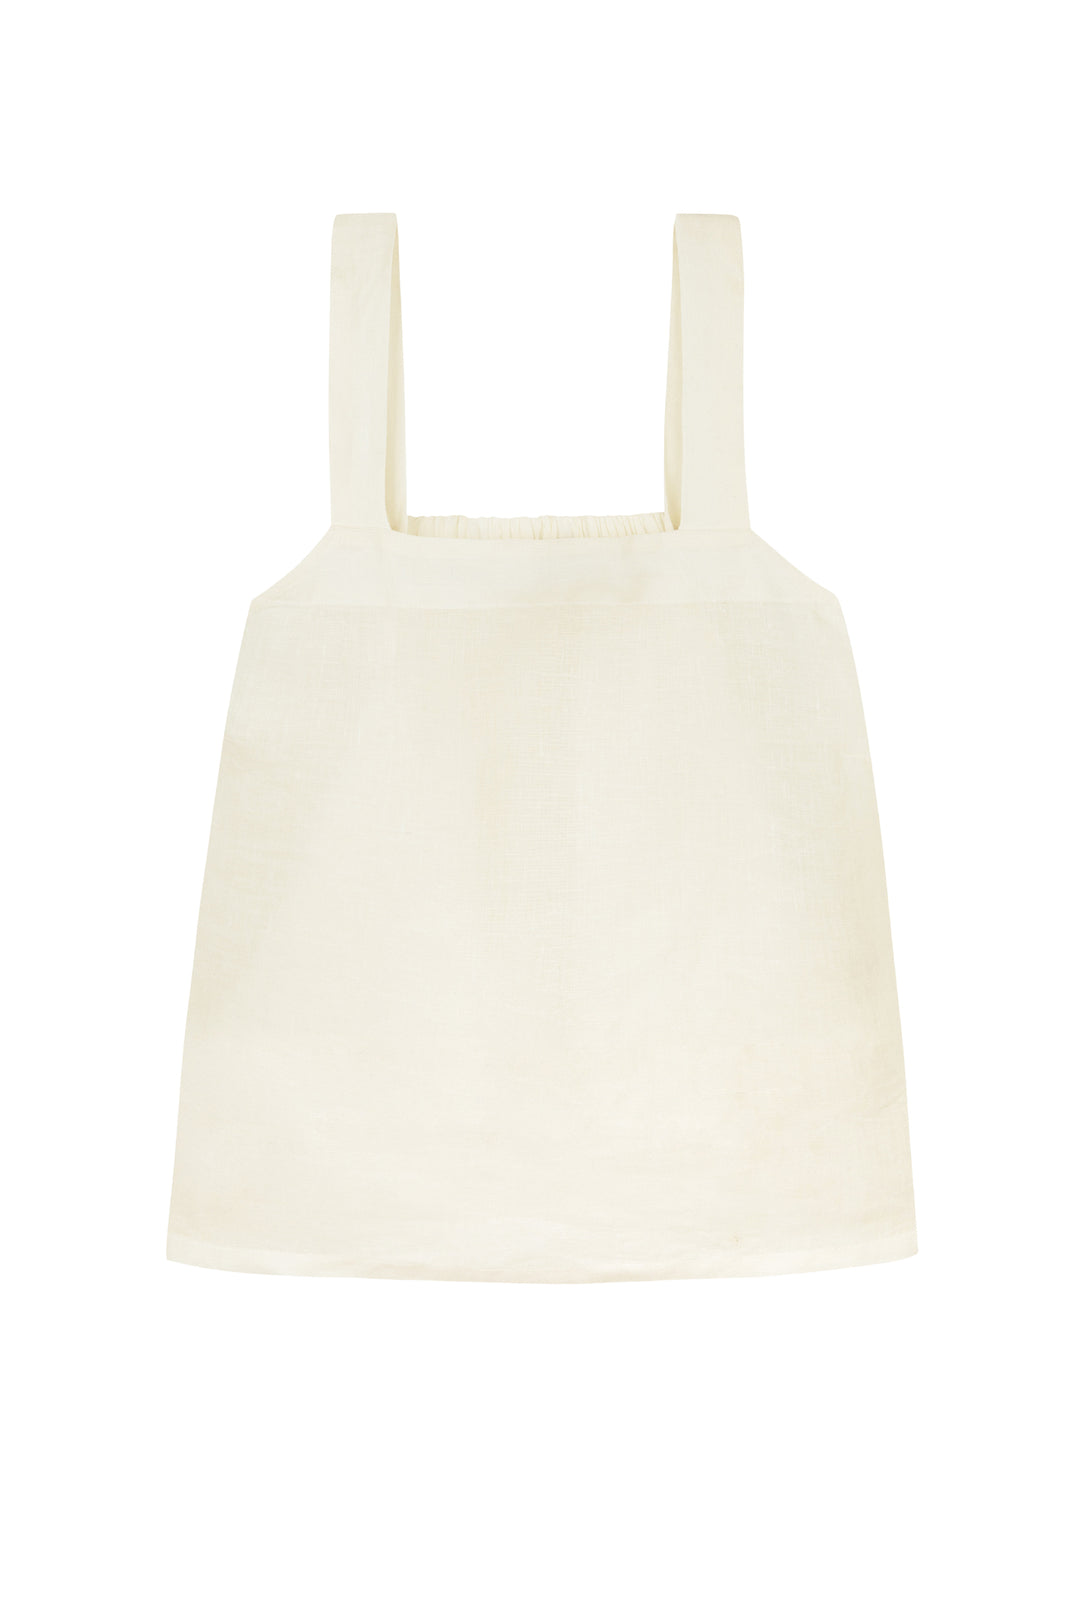 linen square neck camisole sleeveless swing top cream foundling